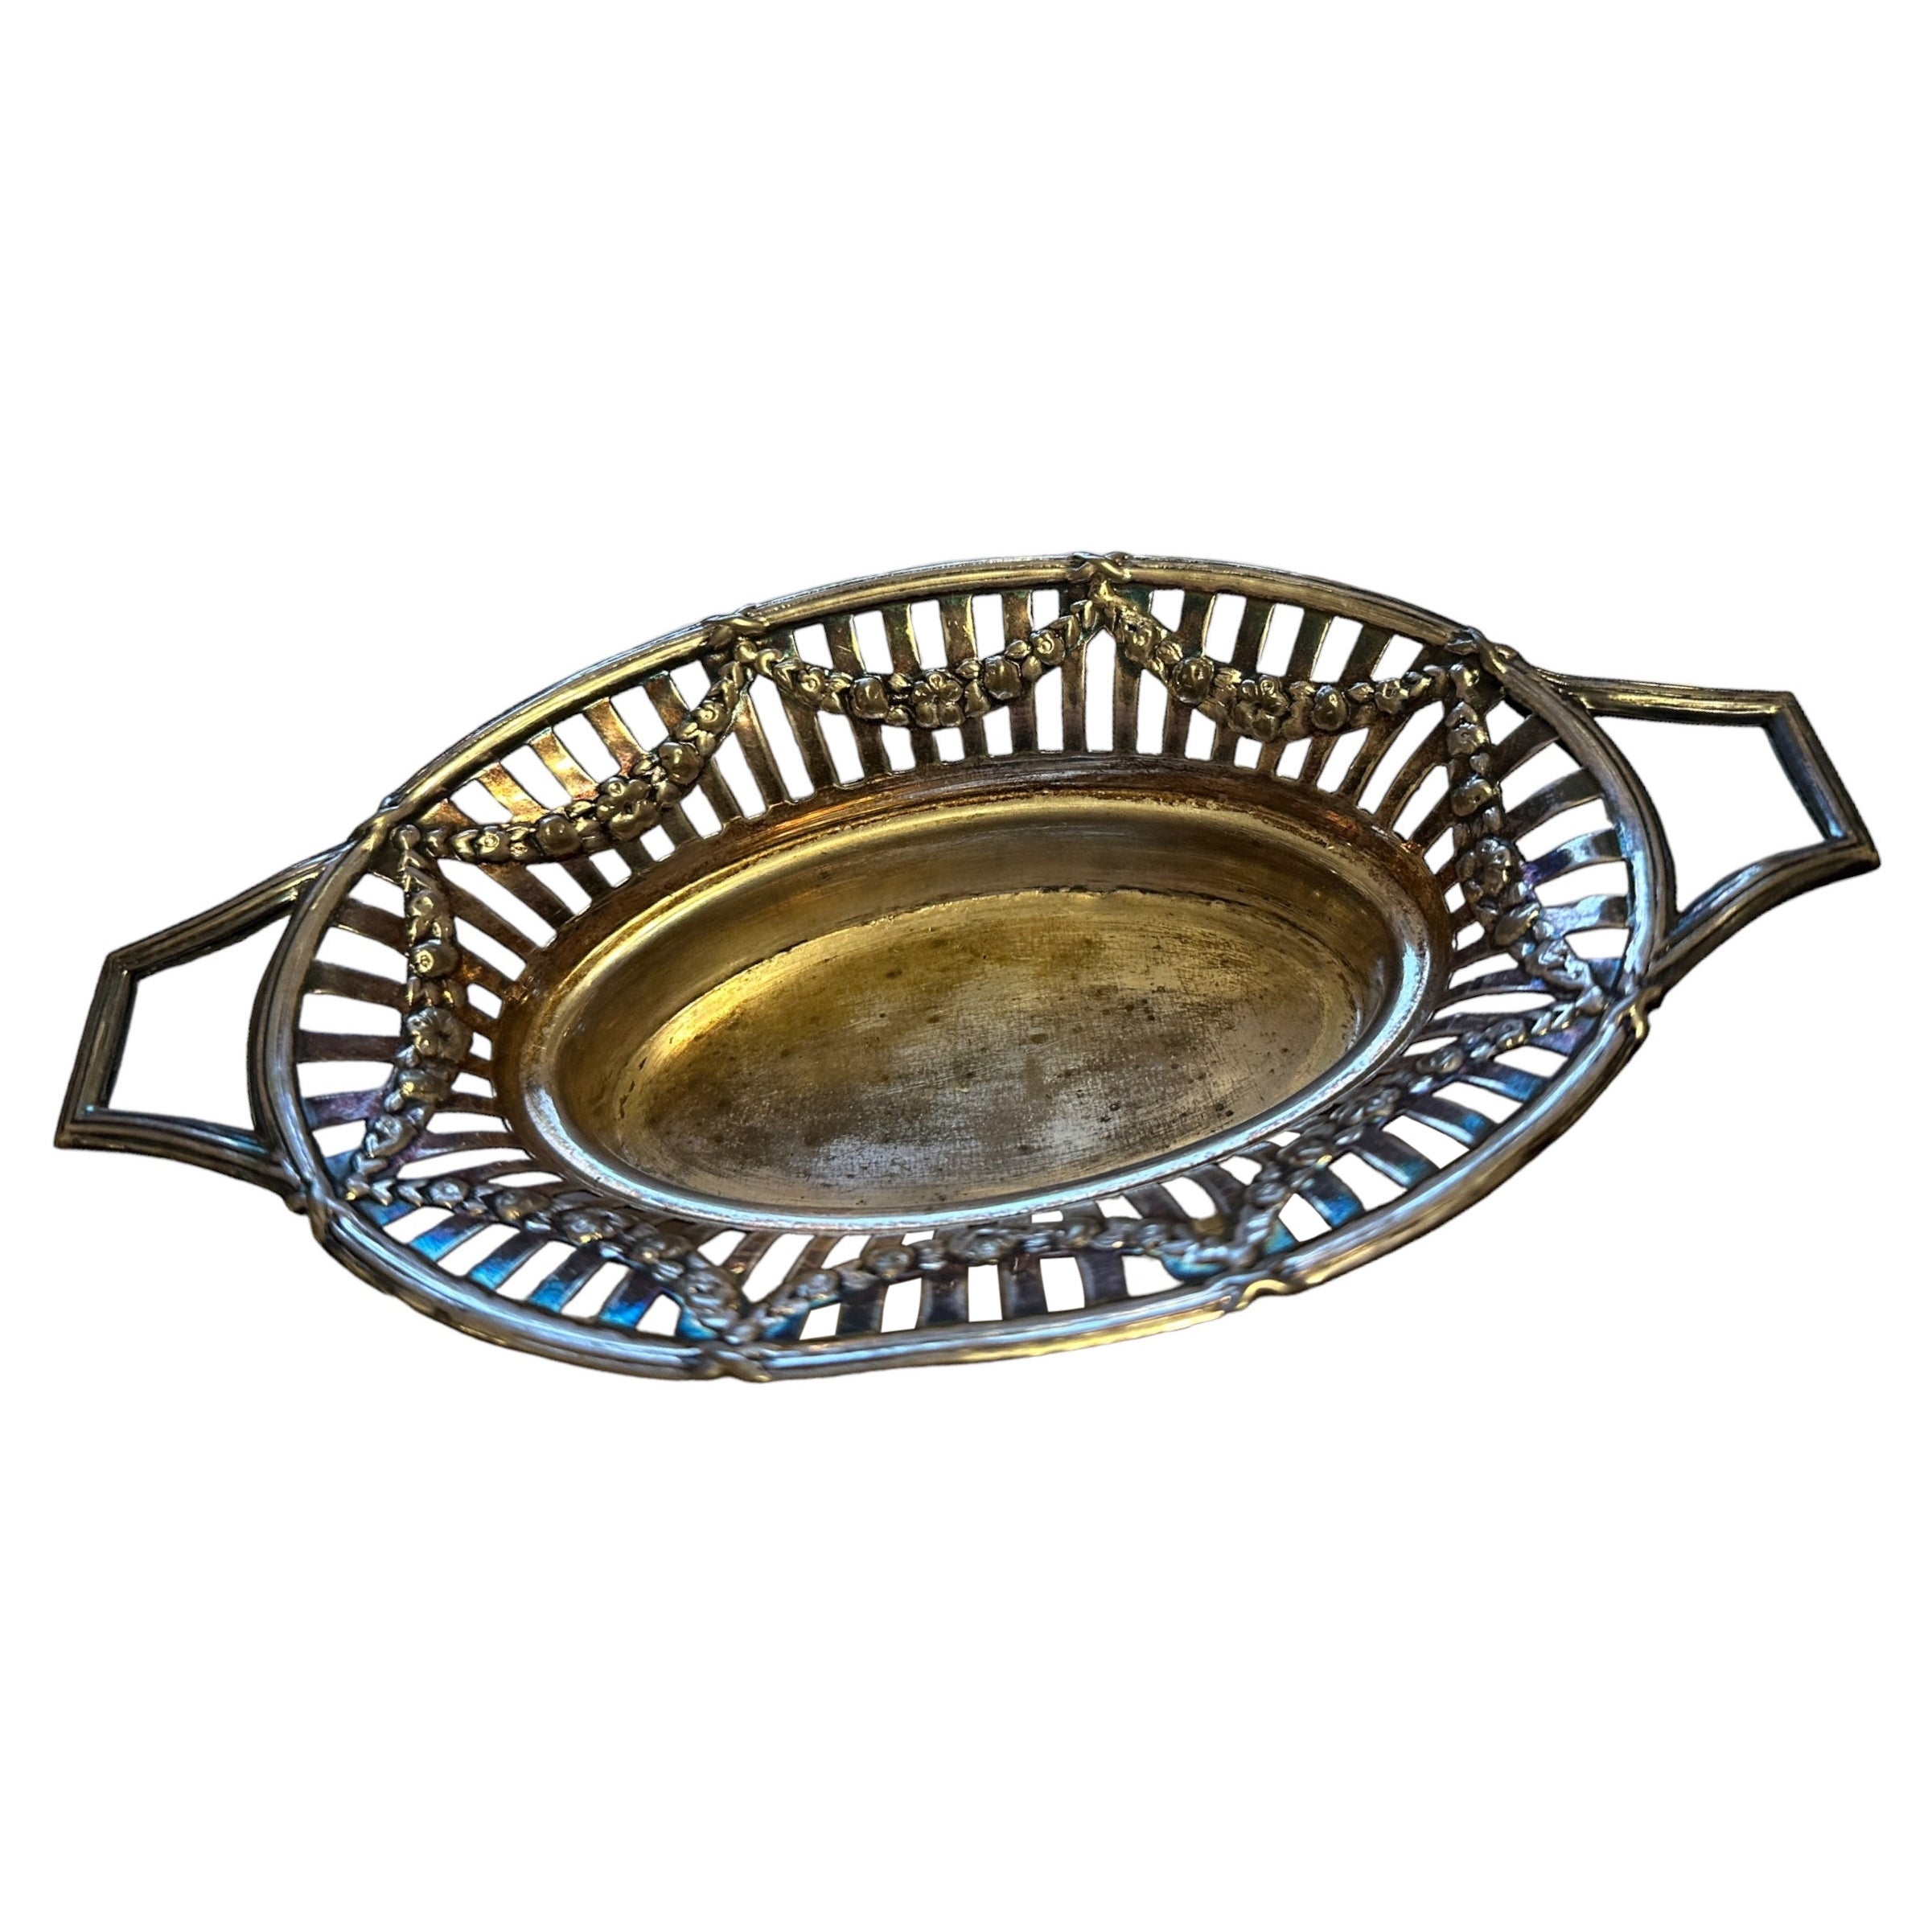 Vintage Silver Plate Candy Dish Basket Tray, 1910s, Germany or Austria For Sale